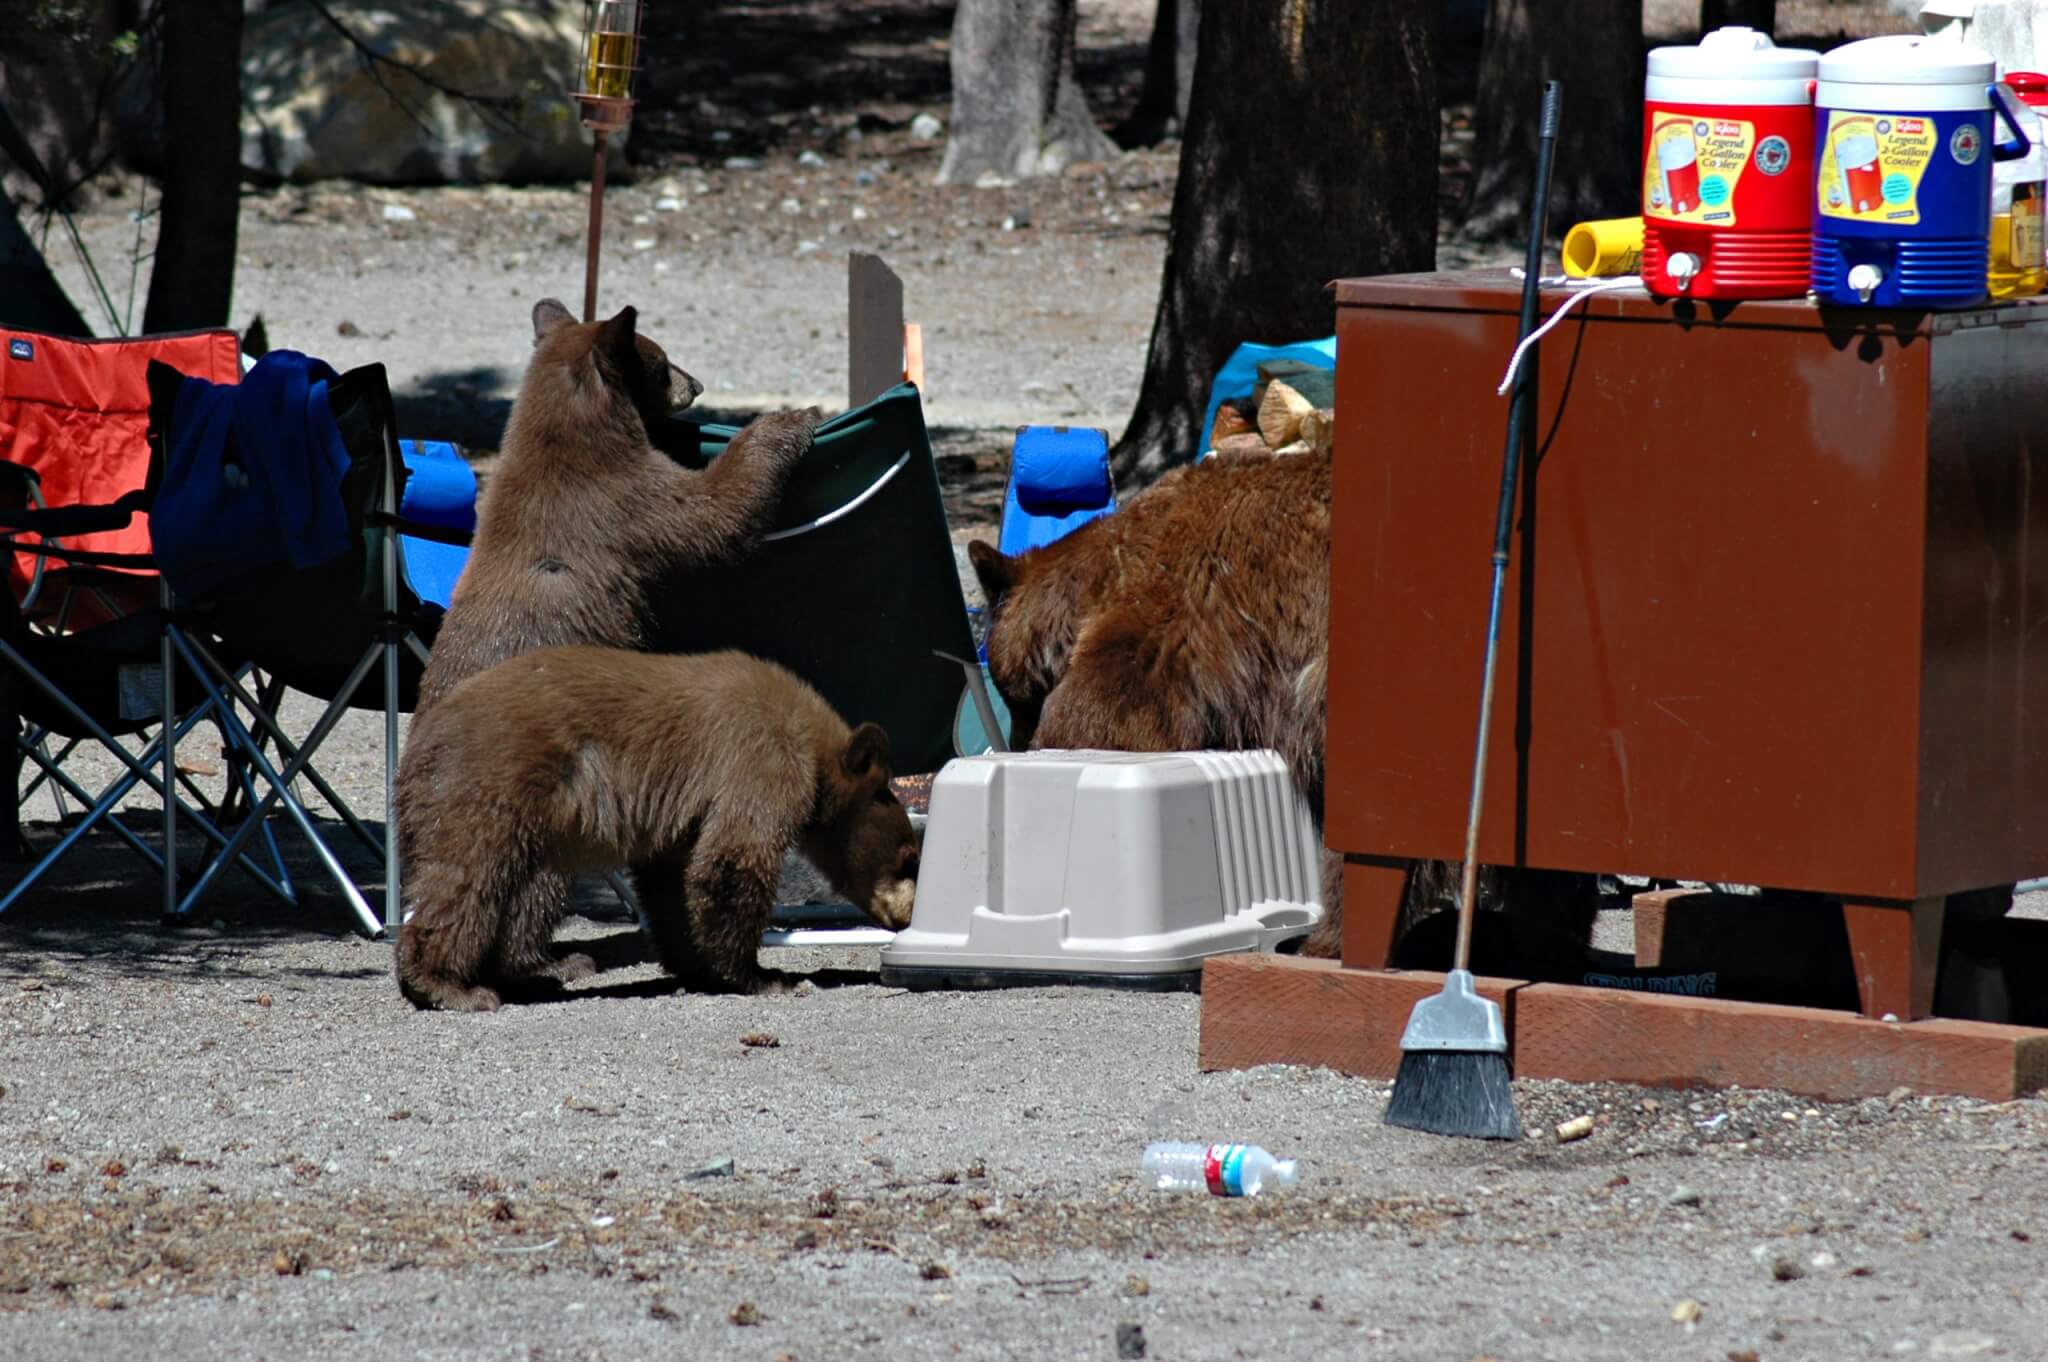 Bears Looking For A Snack At A Campsite